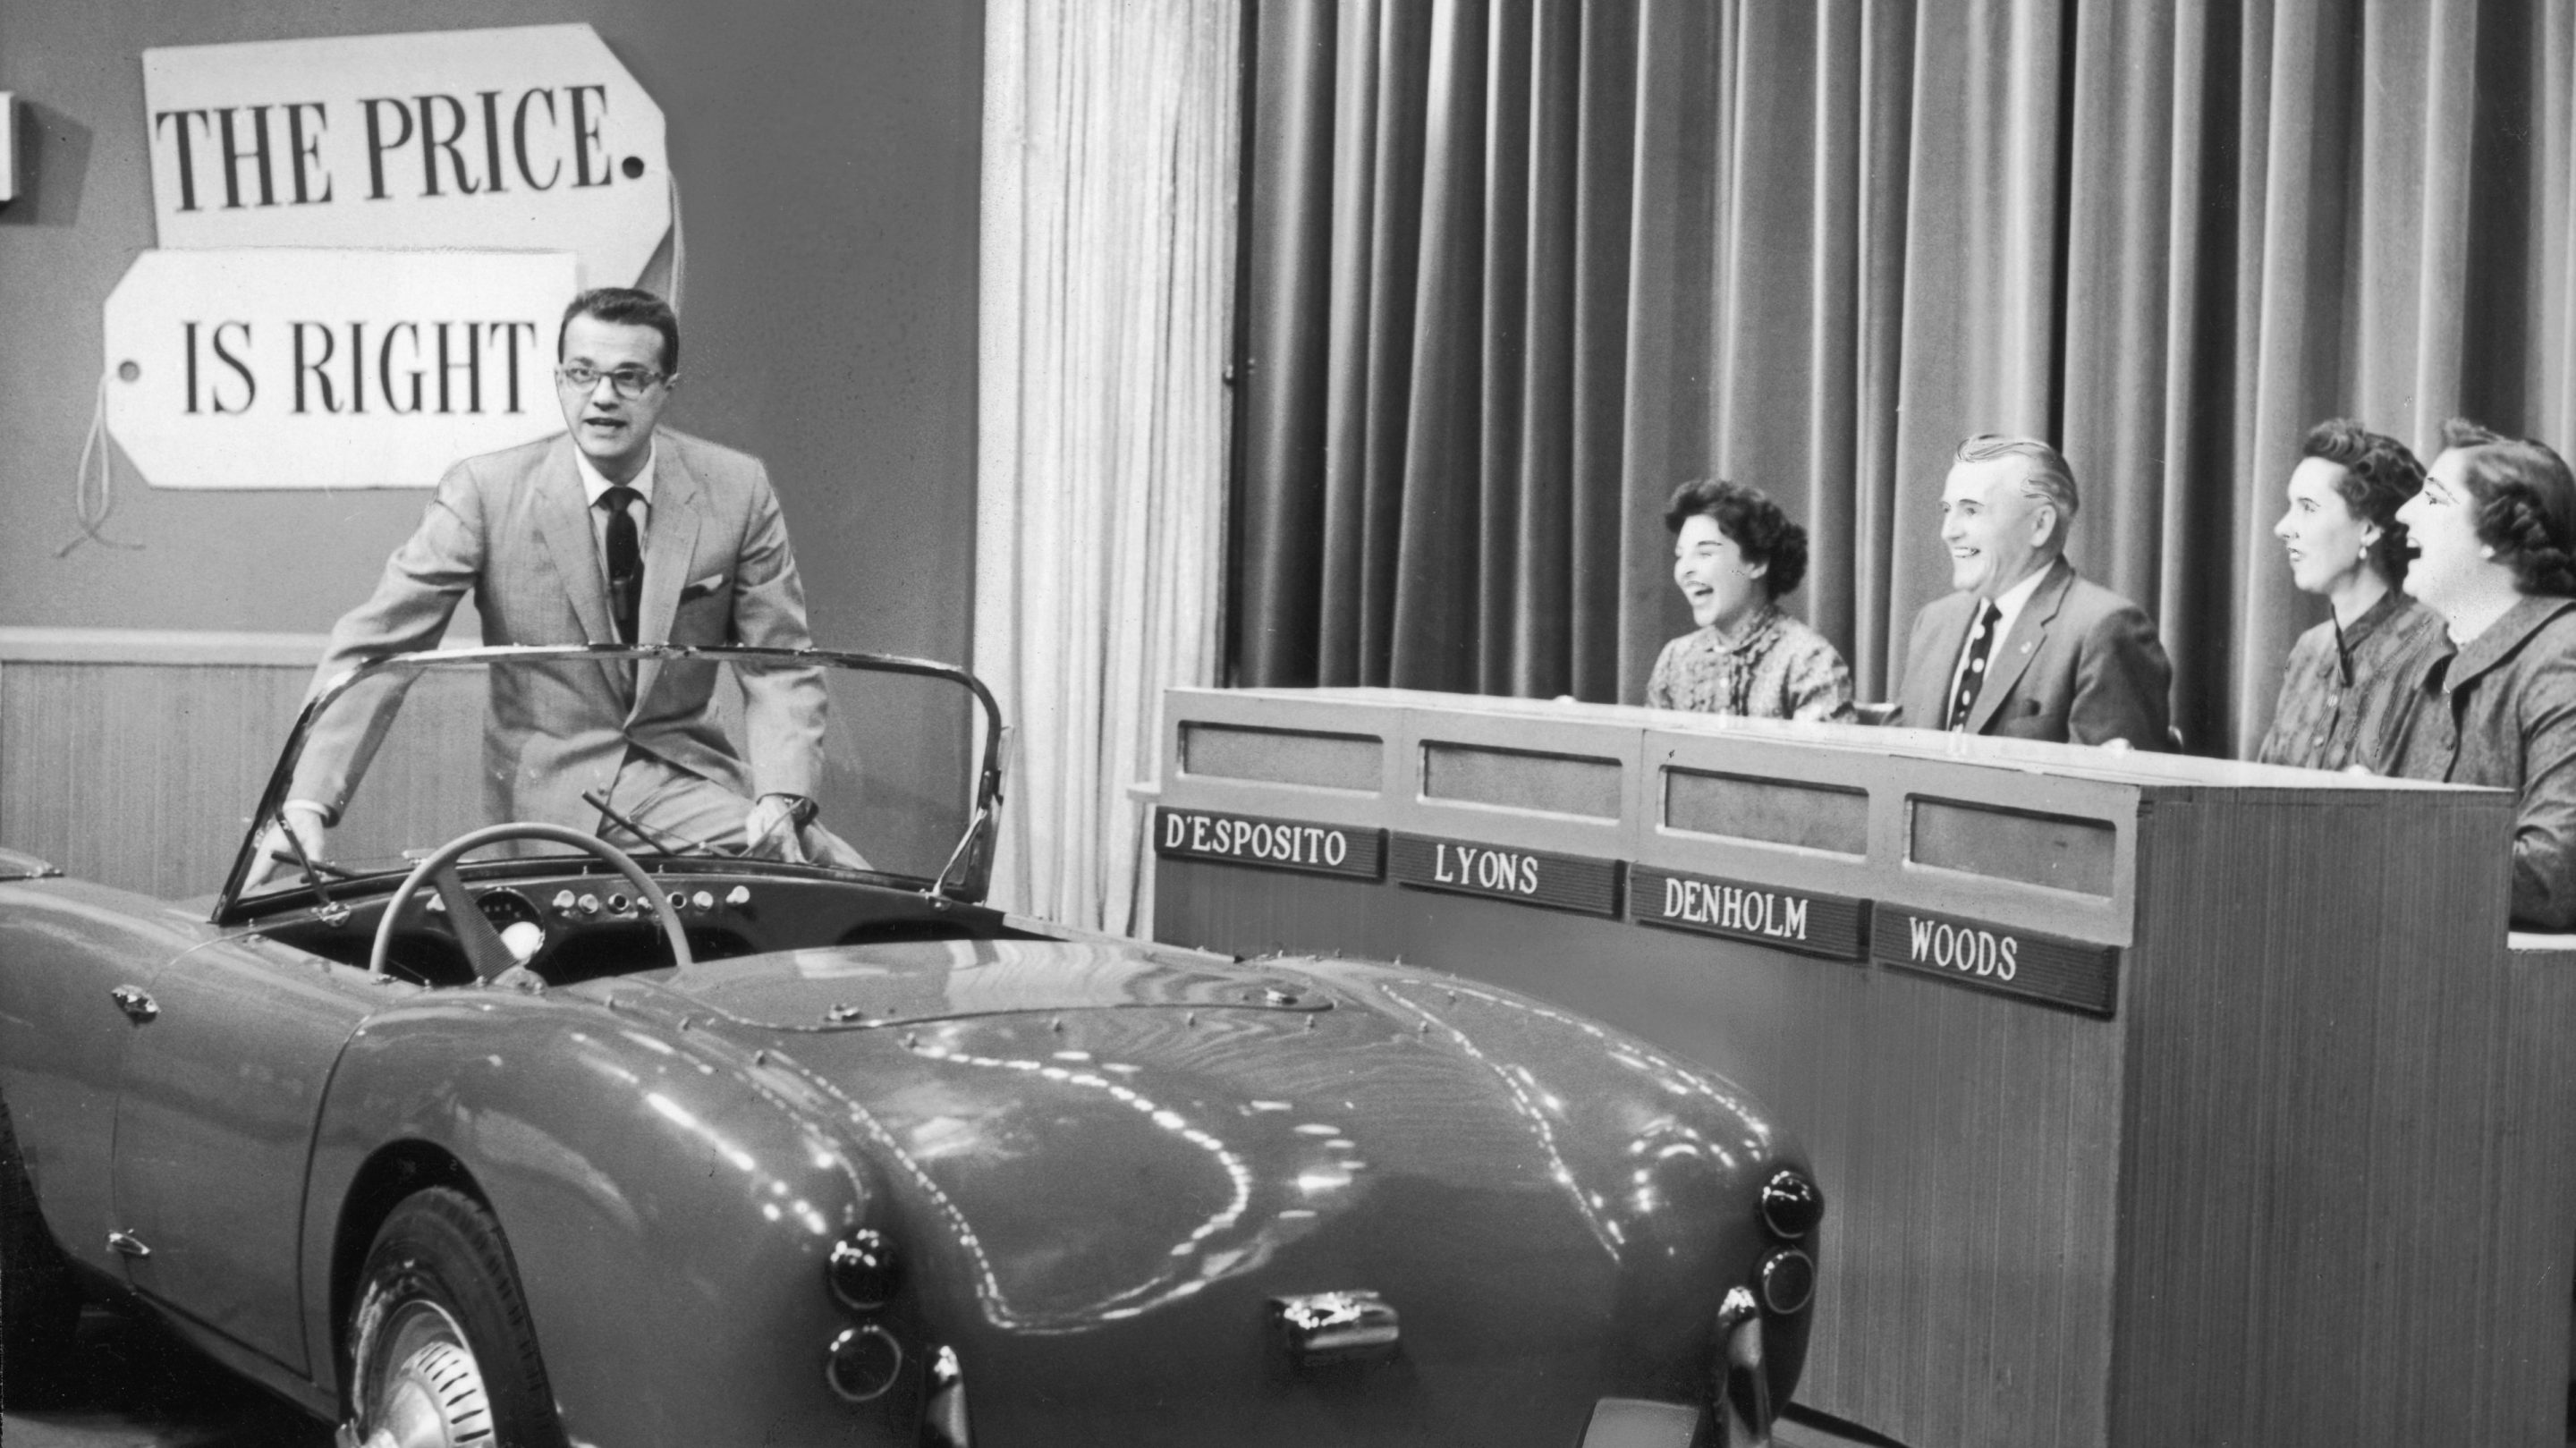 Archive 1960 photo of The Price Is Right